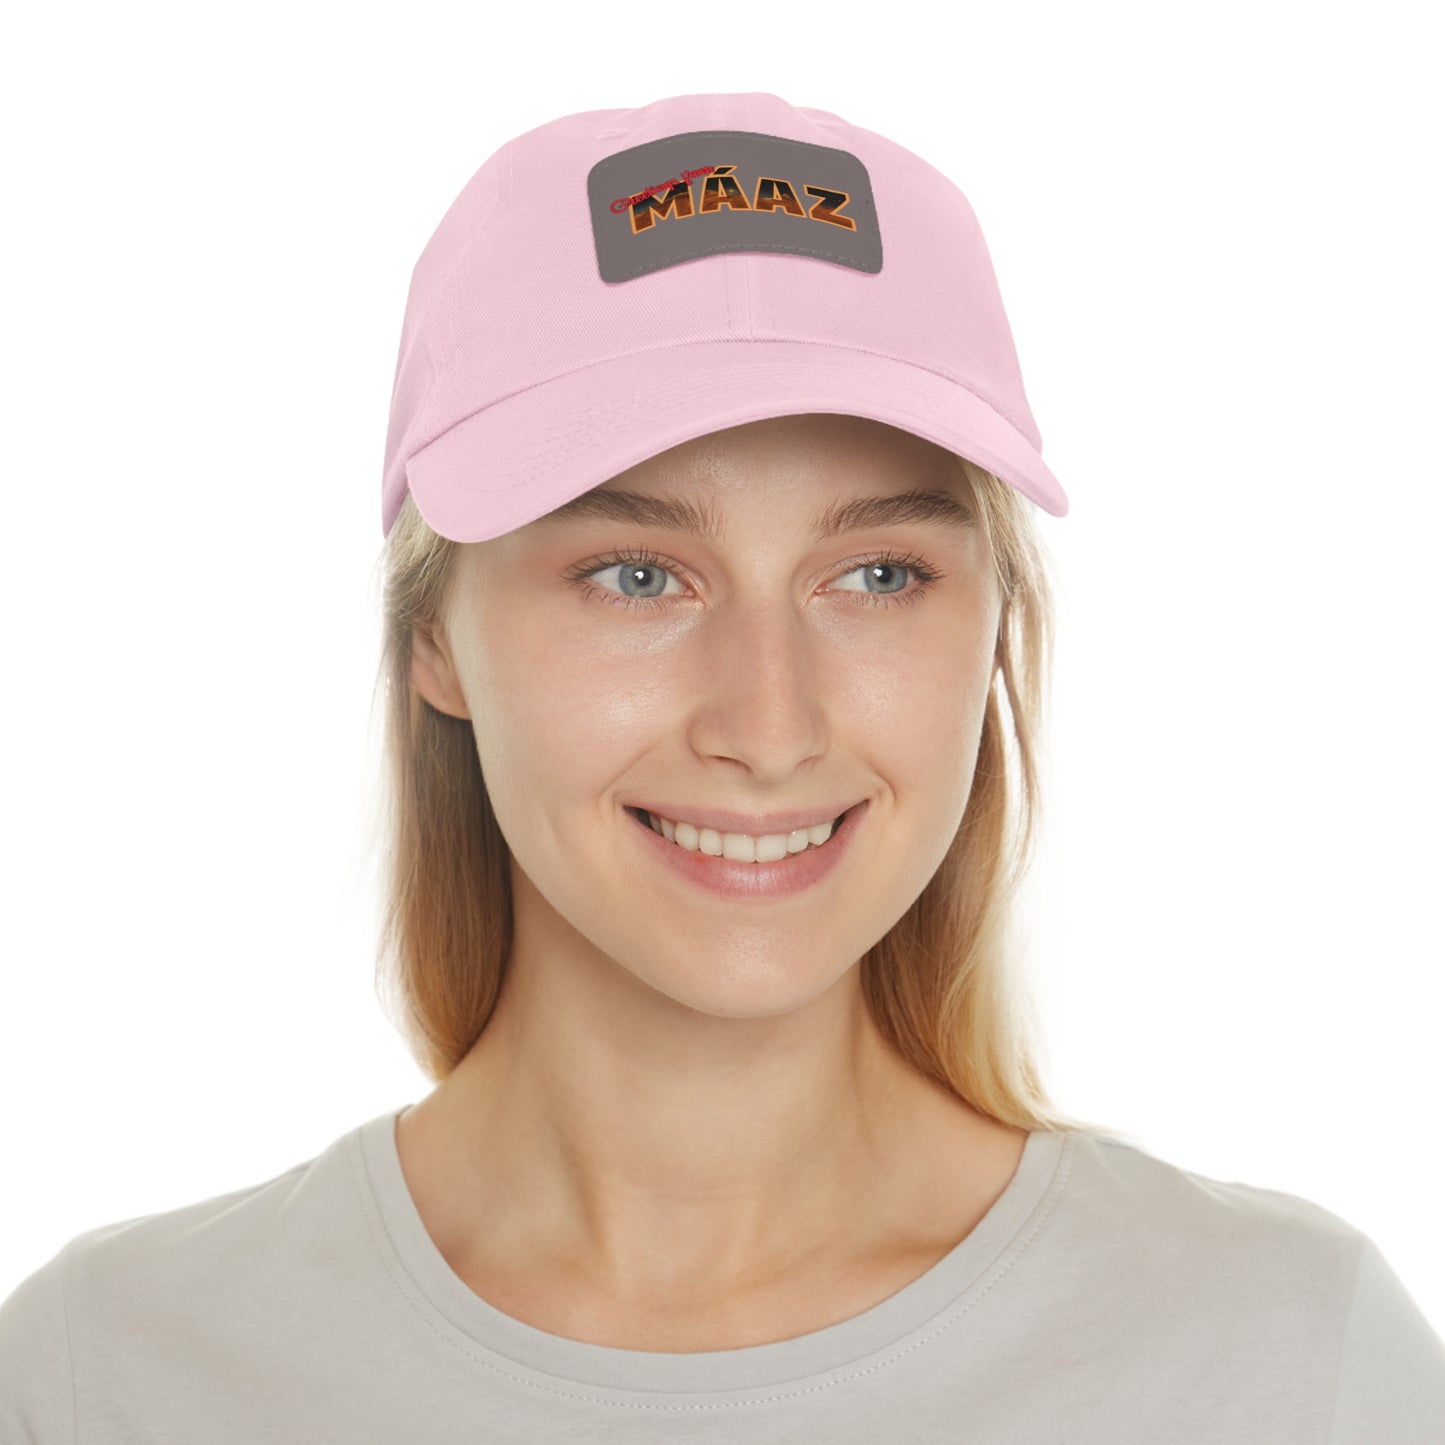 Greetings from Máaz Dad Hat with Leather Patch (Rectangle)